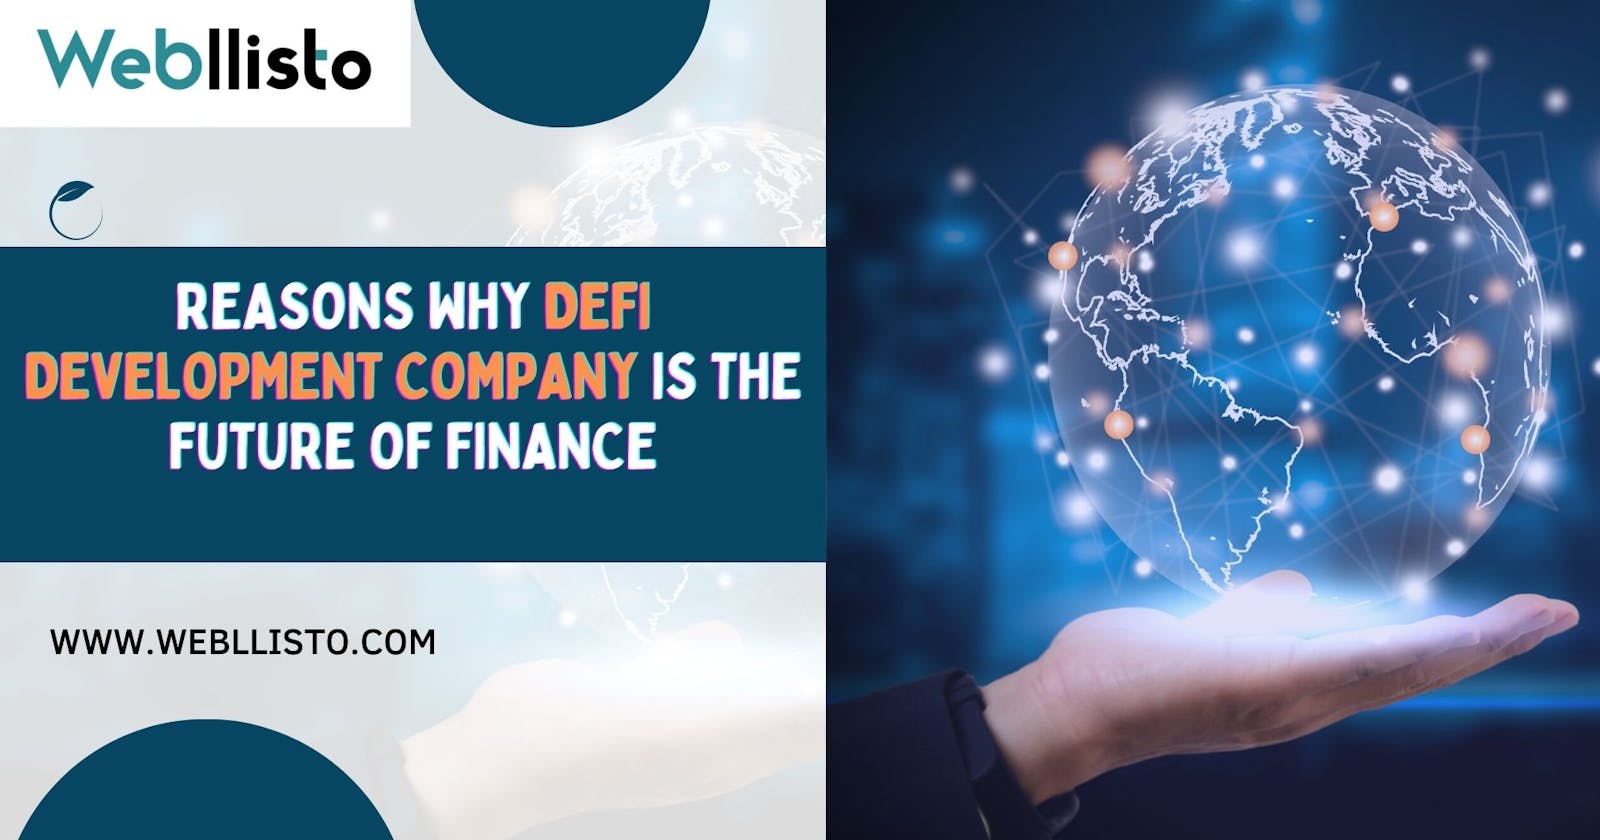 Reasons Why Defi Development Companies Are the Future of Finance